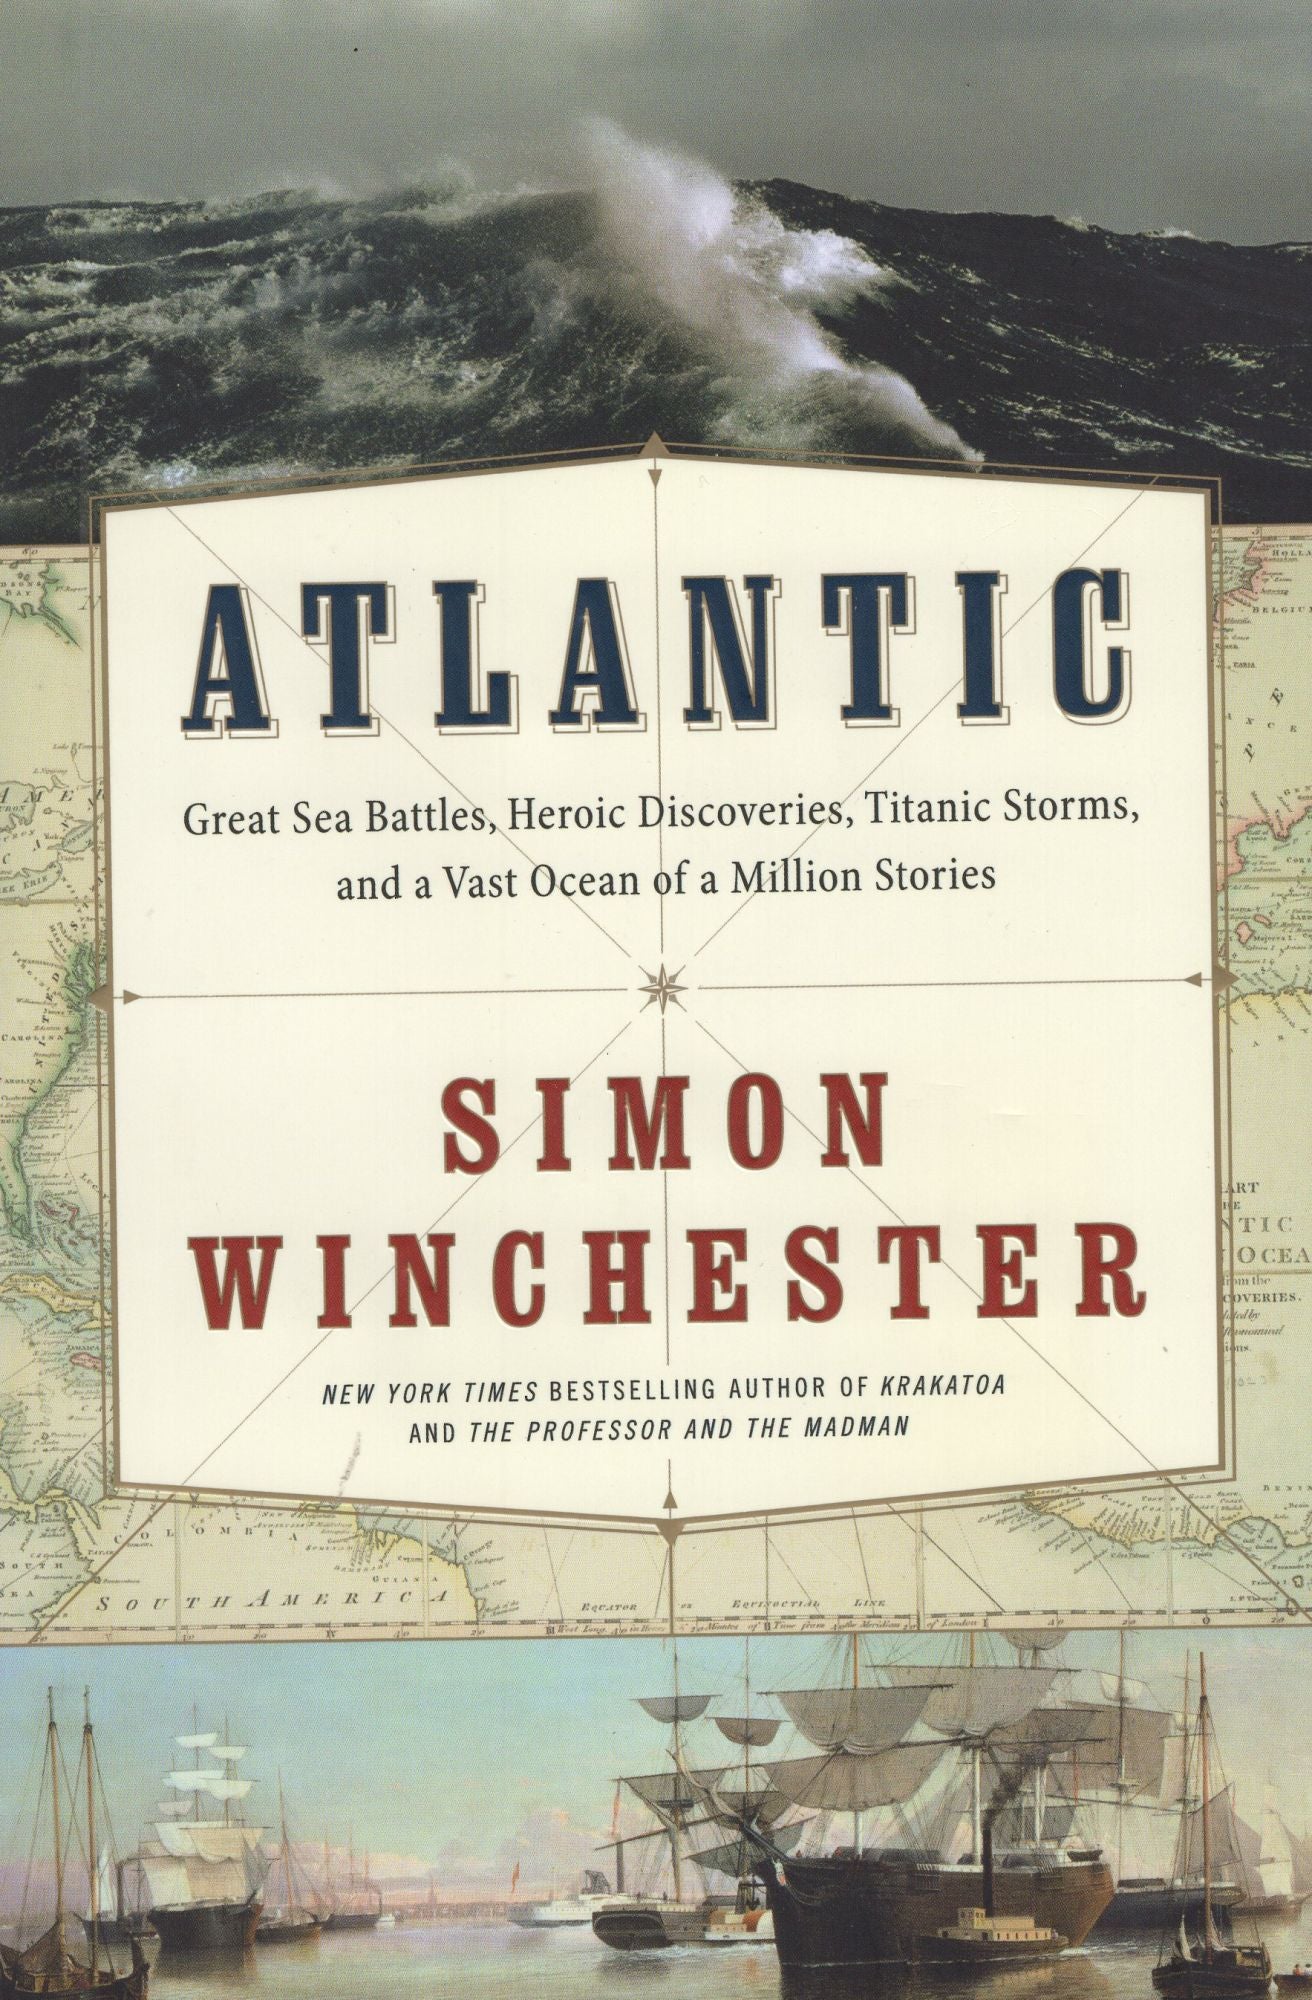 Great　Battles,　Storms,and　Heroic　Discoveries,　Simon　Million　Titanic　Edition　a　Vast　Ocean　a　of　Stories　Winchester　First　Atlantic:　Sea